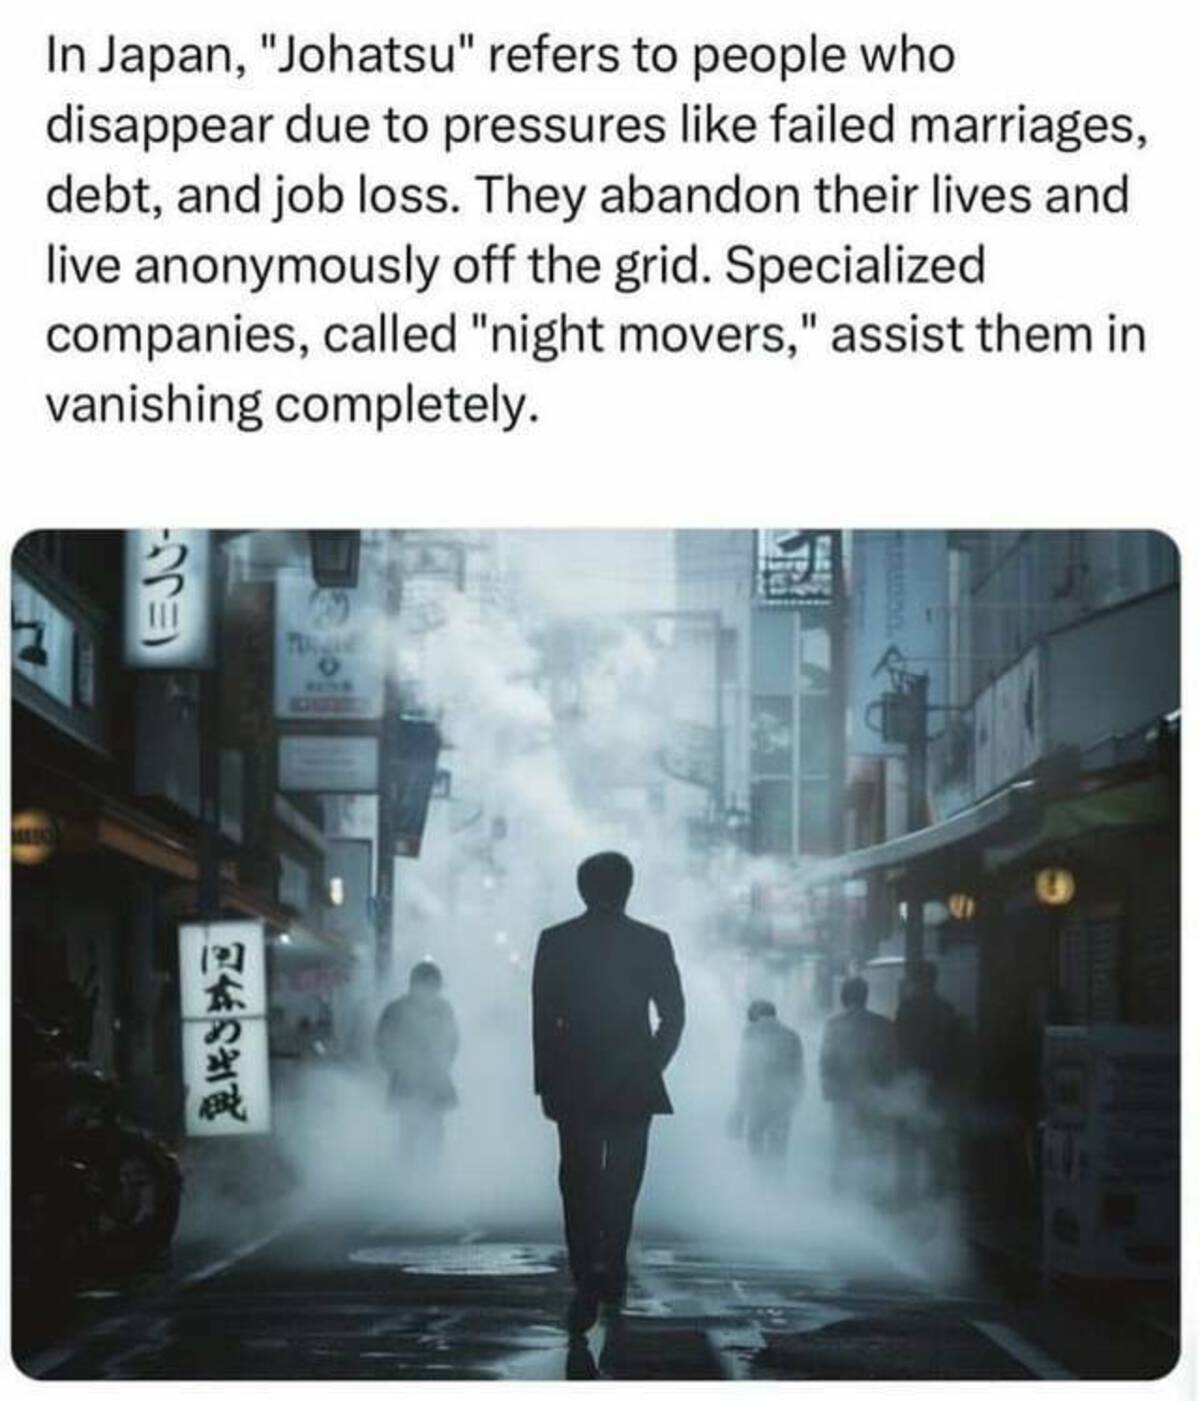 fiction - In Japan, "Johatsu" refers to people who disappear due to pressures failed marriages, debt, and job loss. They abandon their lives and live anonymously off the grid. Specialized companies, called "night movers," assist them in vanishing complete